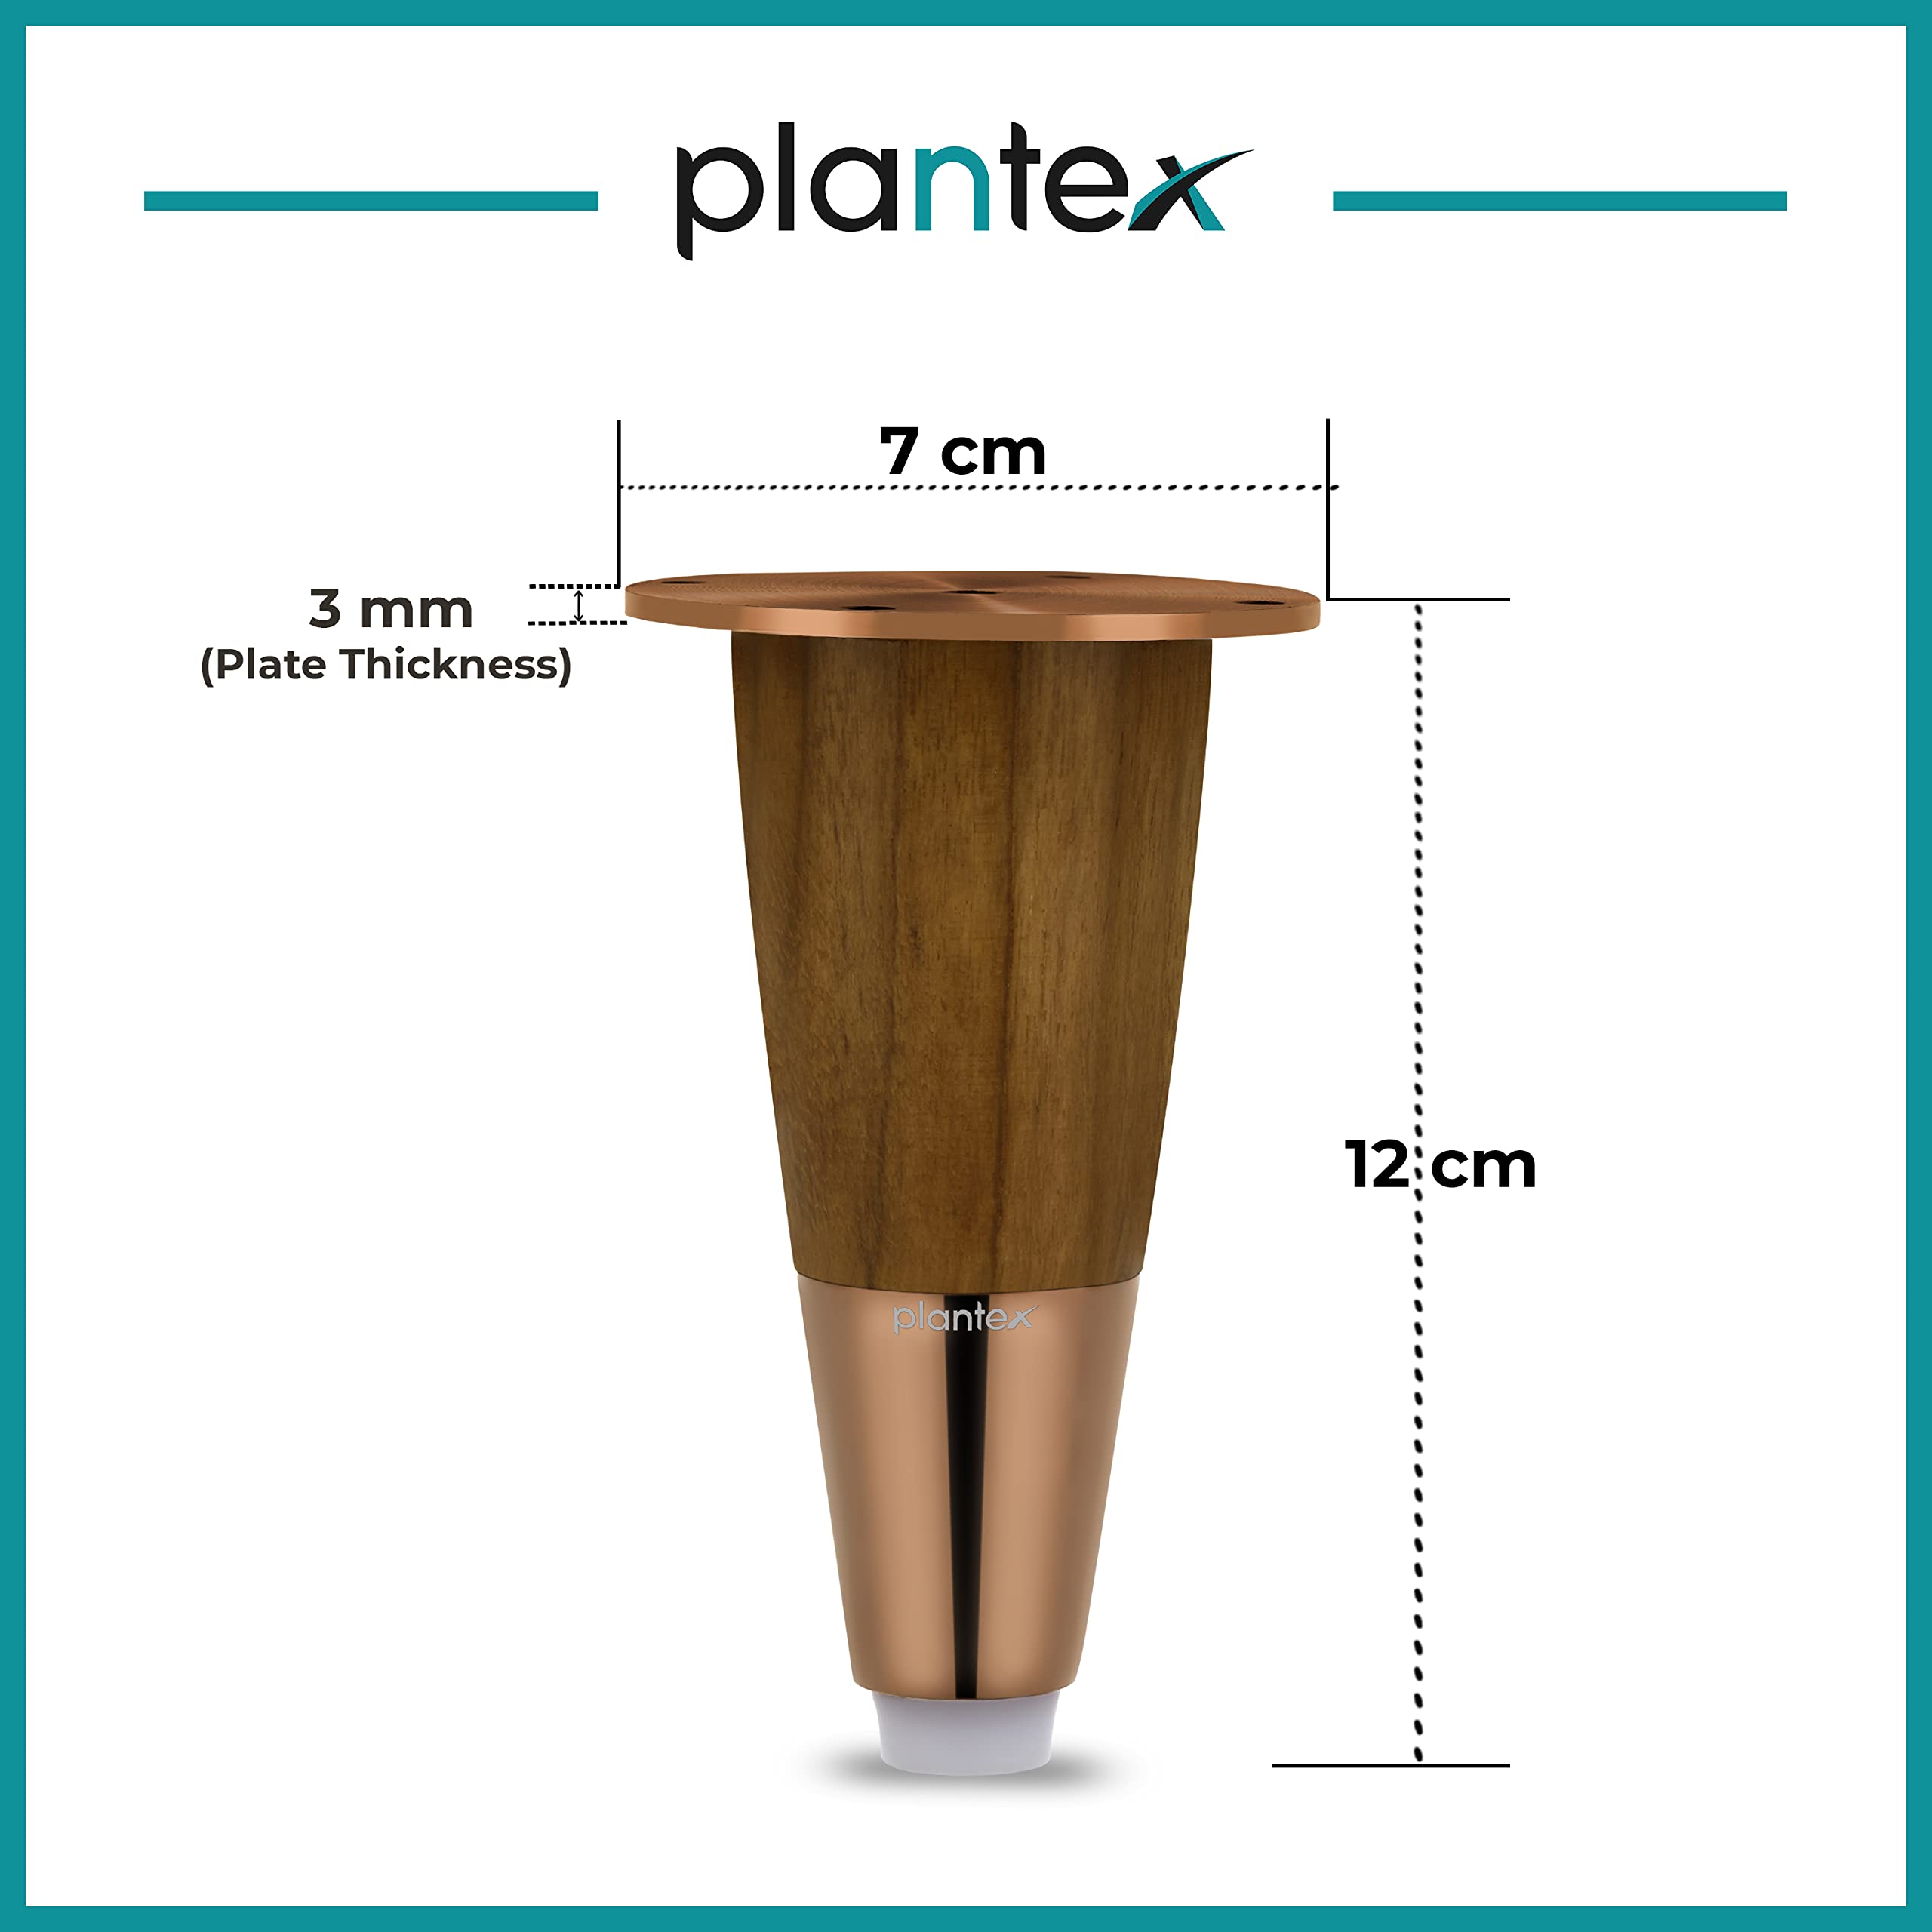 Plantex Stainless Steel and Wood 4 inch Sofa Leg/Bed Furniture Leg Pair for Home Furnitures (DTS-55-PVD Rose Gold) – 2 Pcs